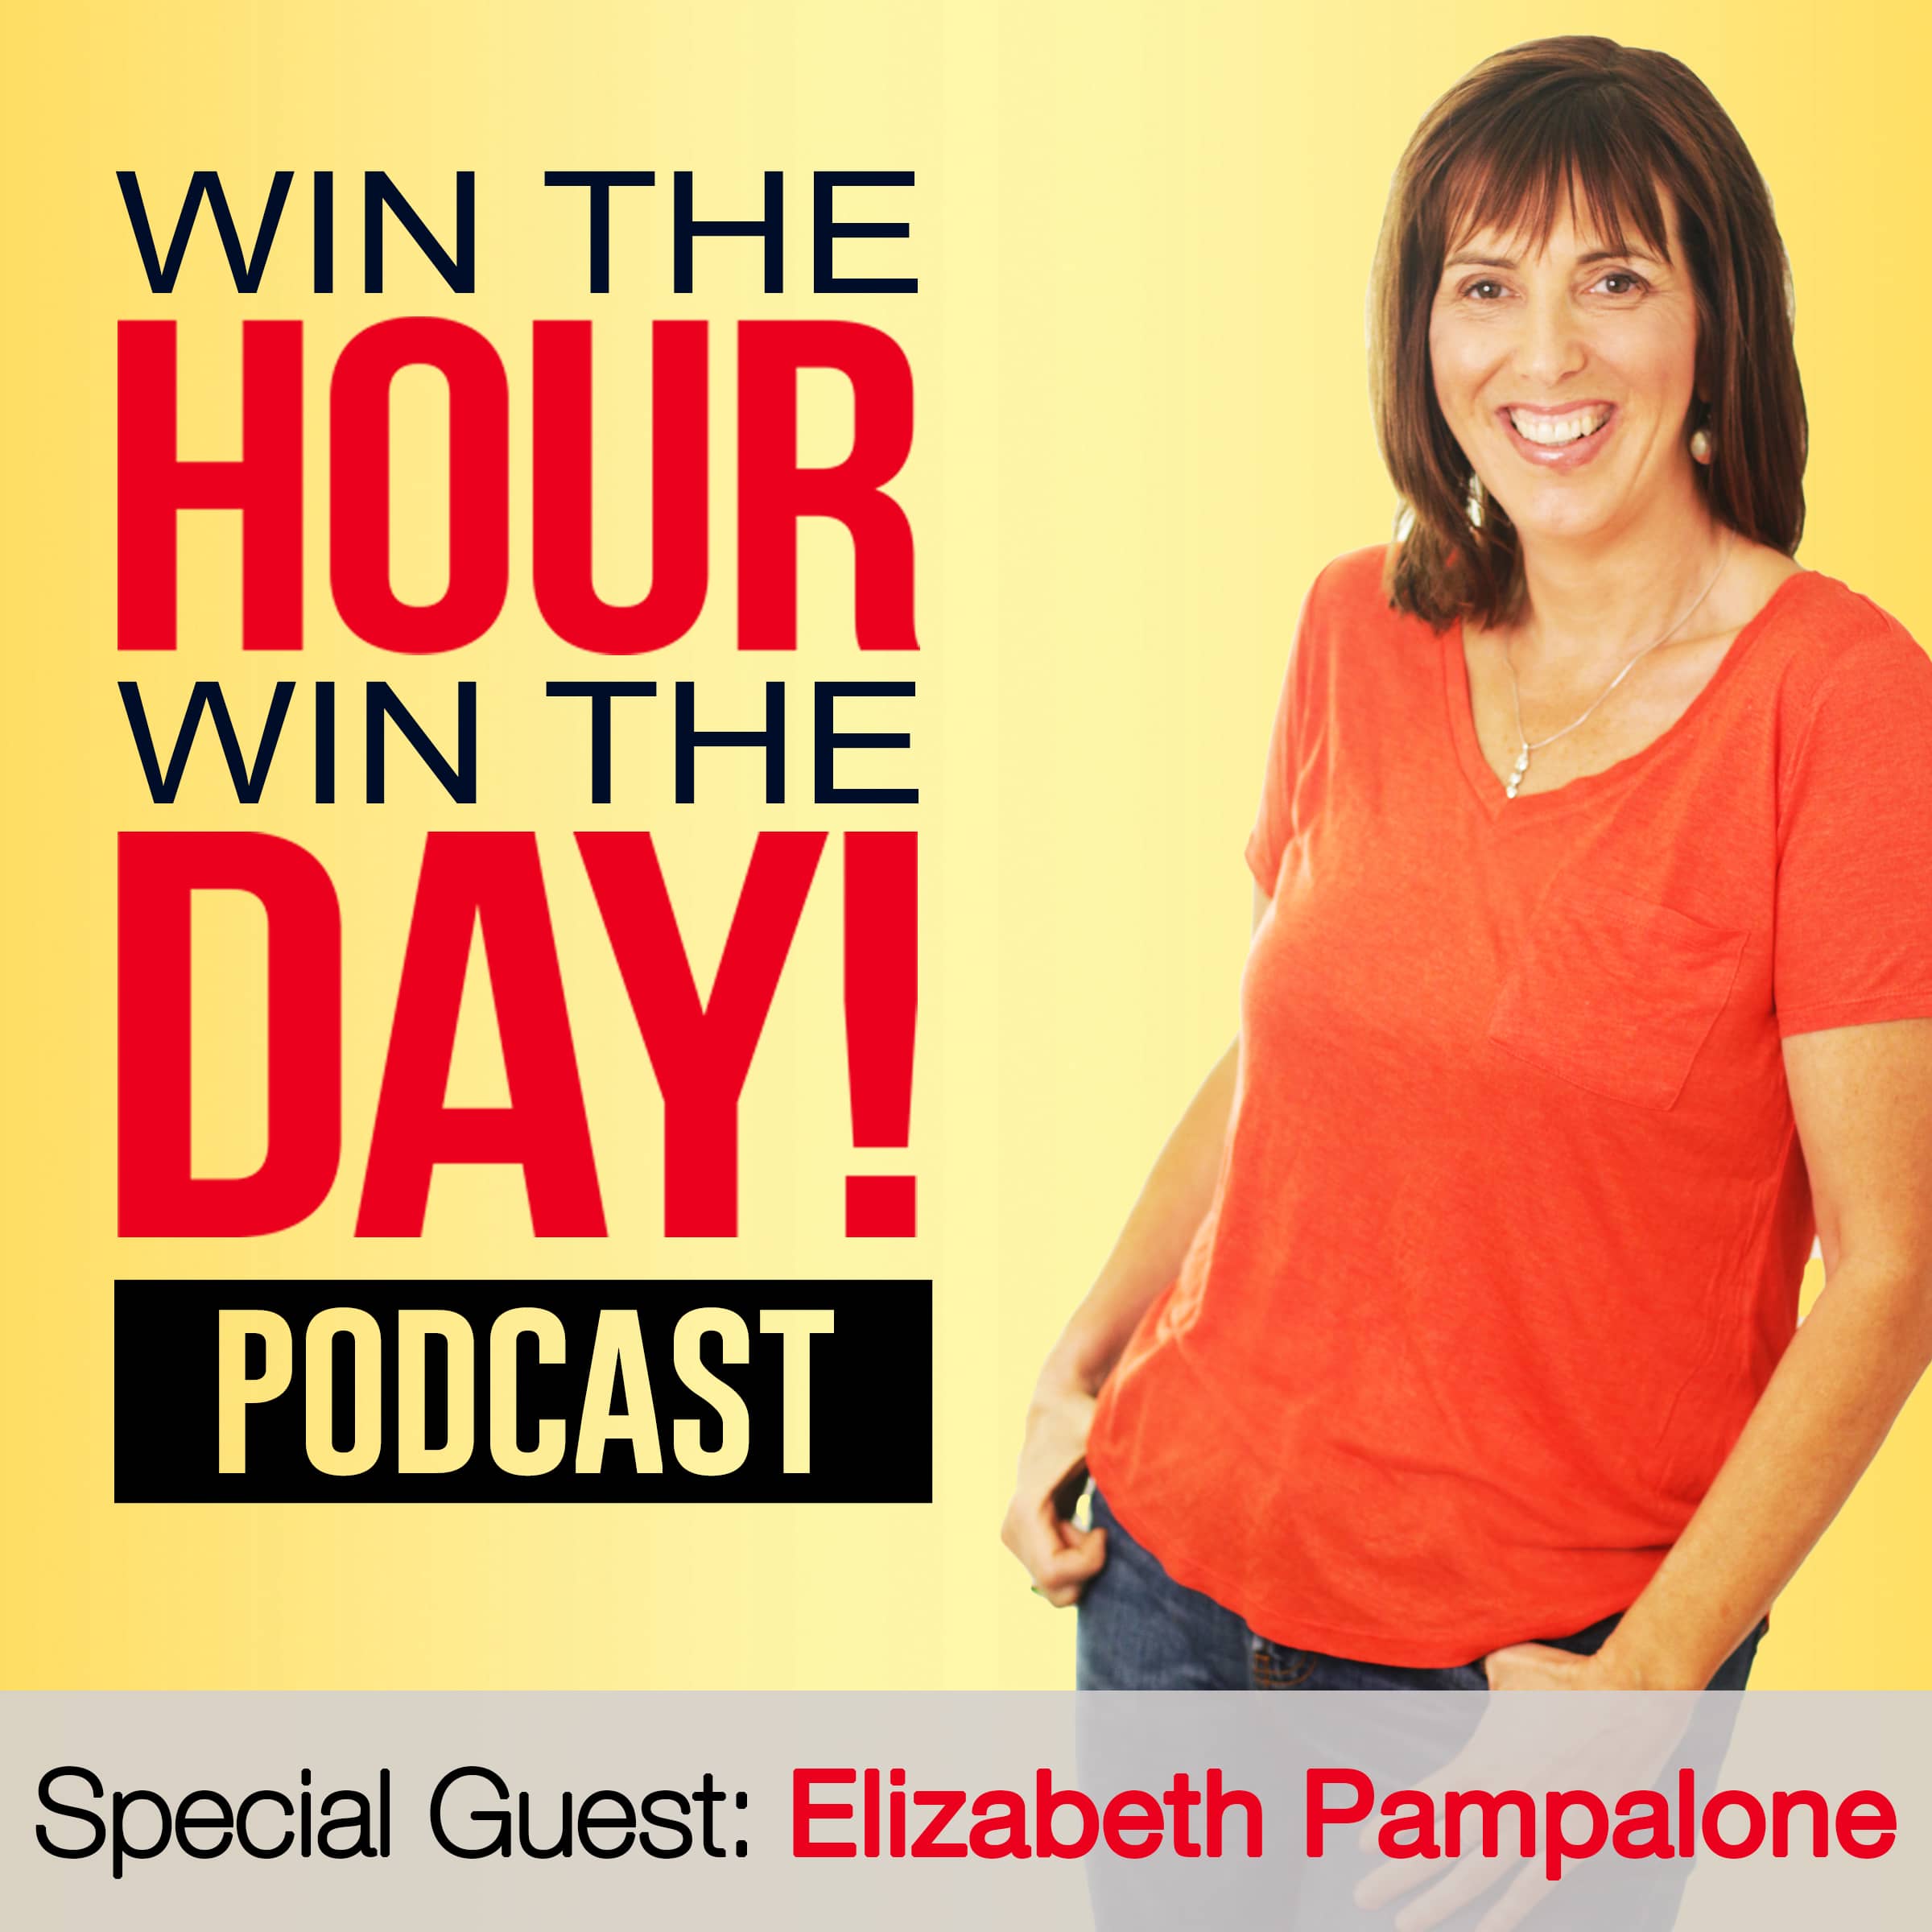 Social Media Content: Never Worry About It! With Elizabeth Pampalone